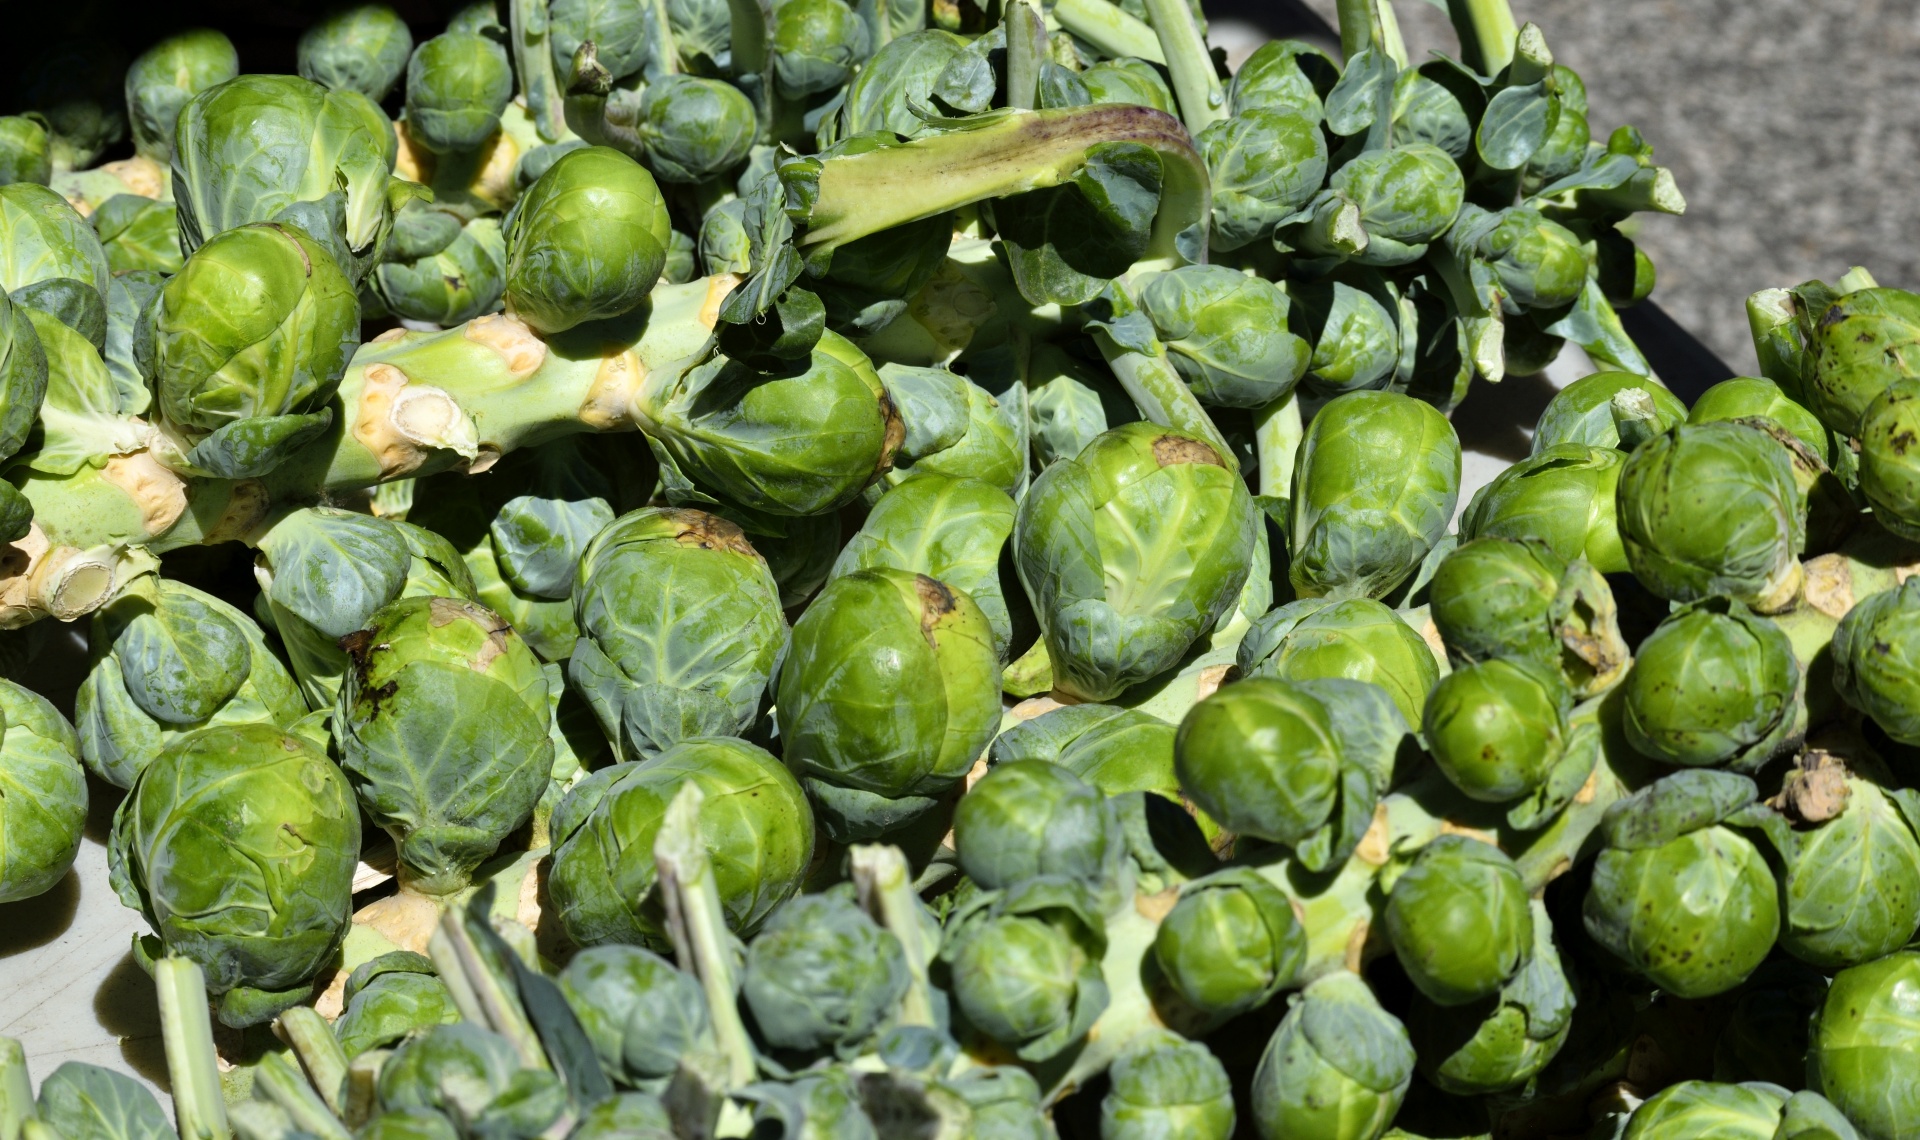 Brussel Sprouts For Sale